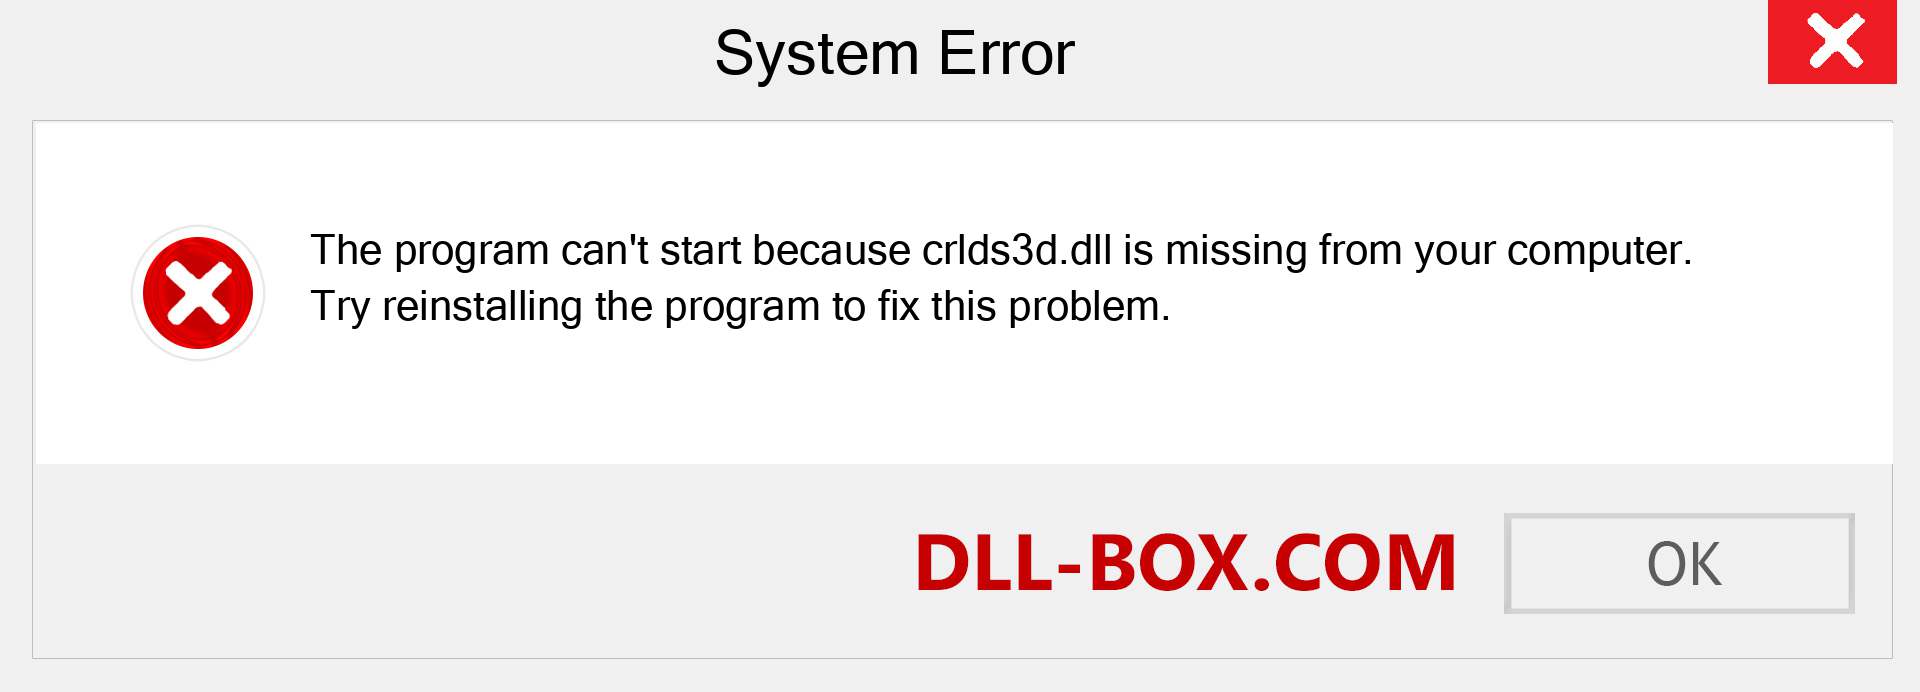  crlds3d.dll file is missing?. Download for Windows 7, 8, 10 - Fix  crlds3d dll Missing Error on Windows, photos, images